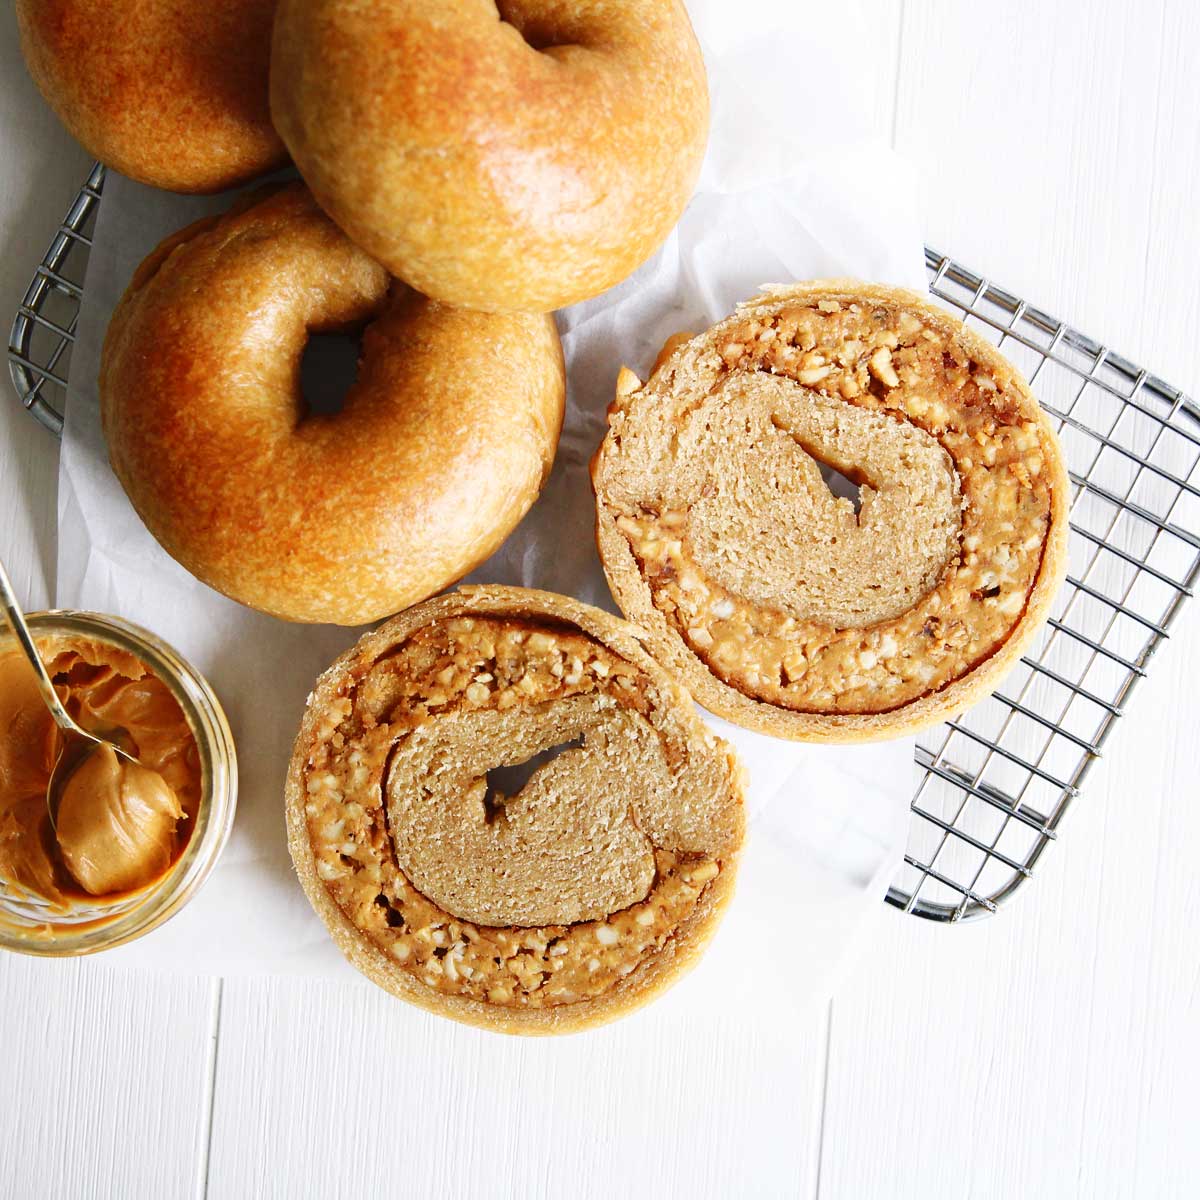 I Stuffed a Bagel With Peanut Butter! High Protein PB Stuffed Bagels Recipe - Red Bean Mochi Cake